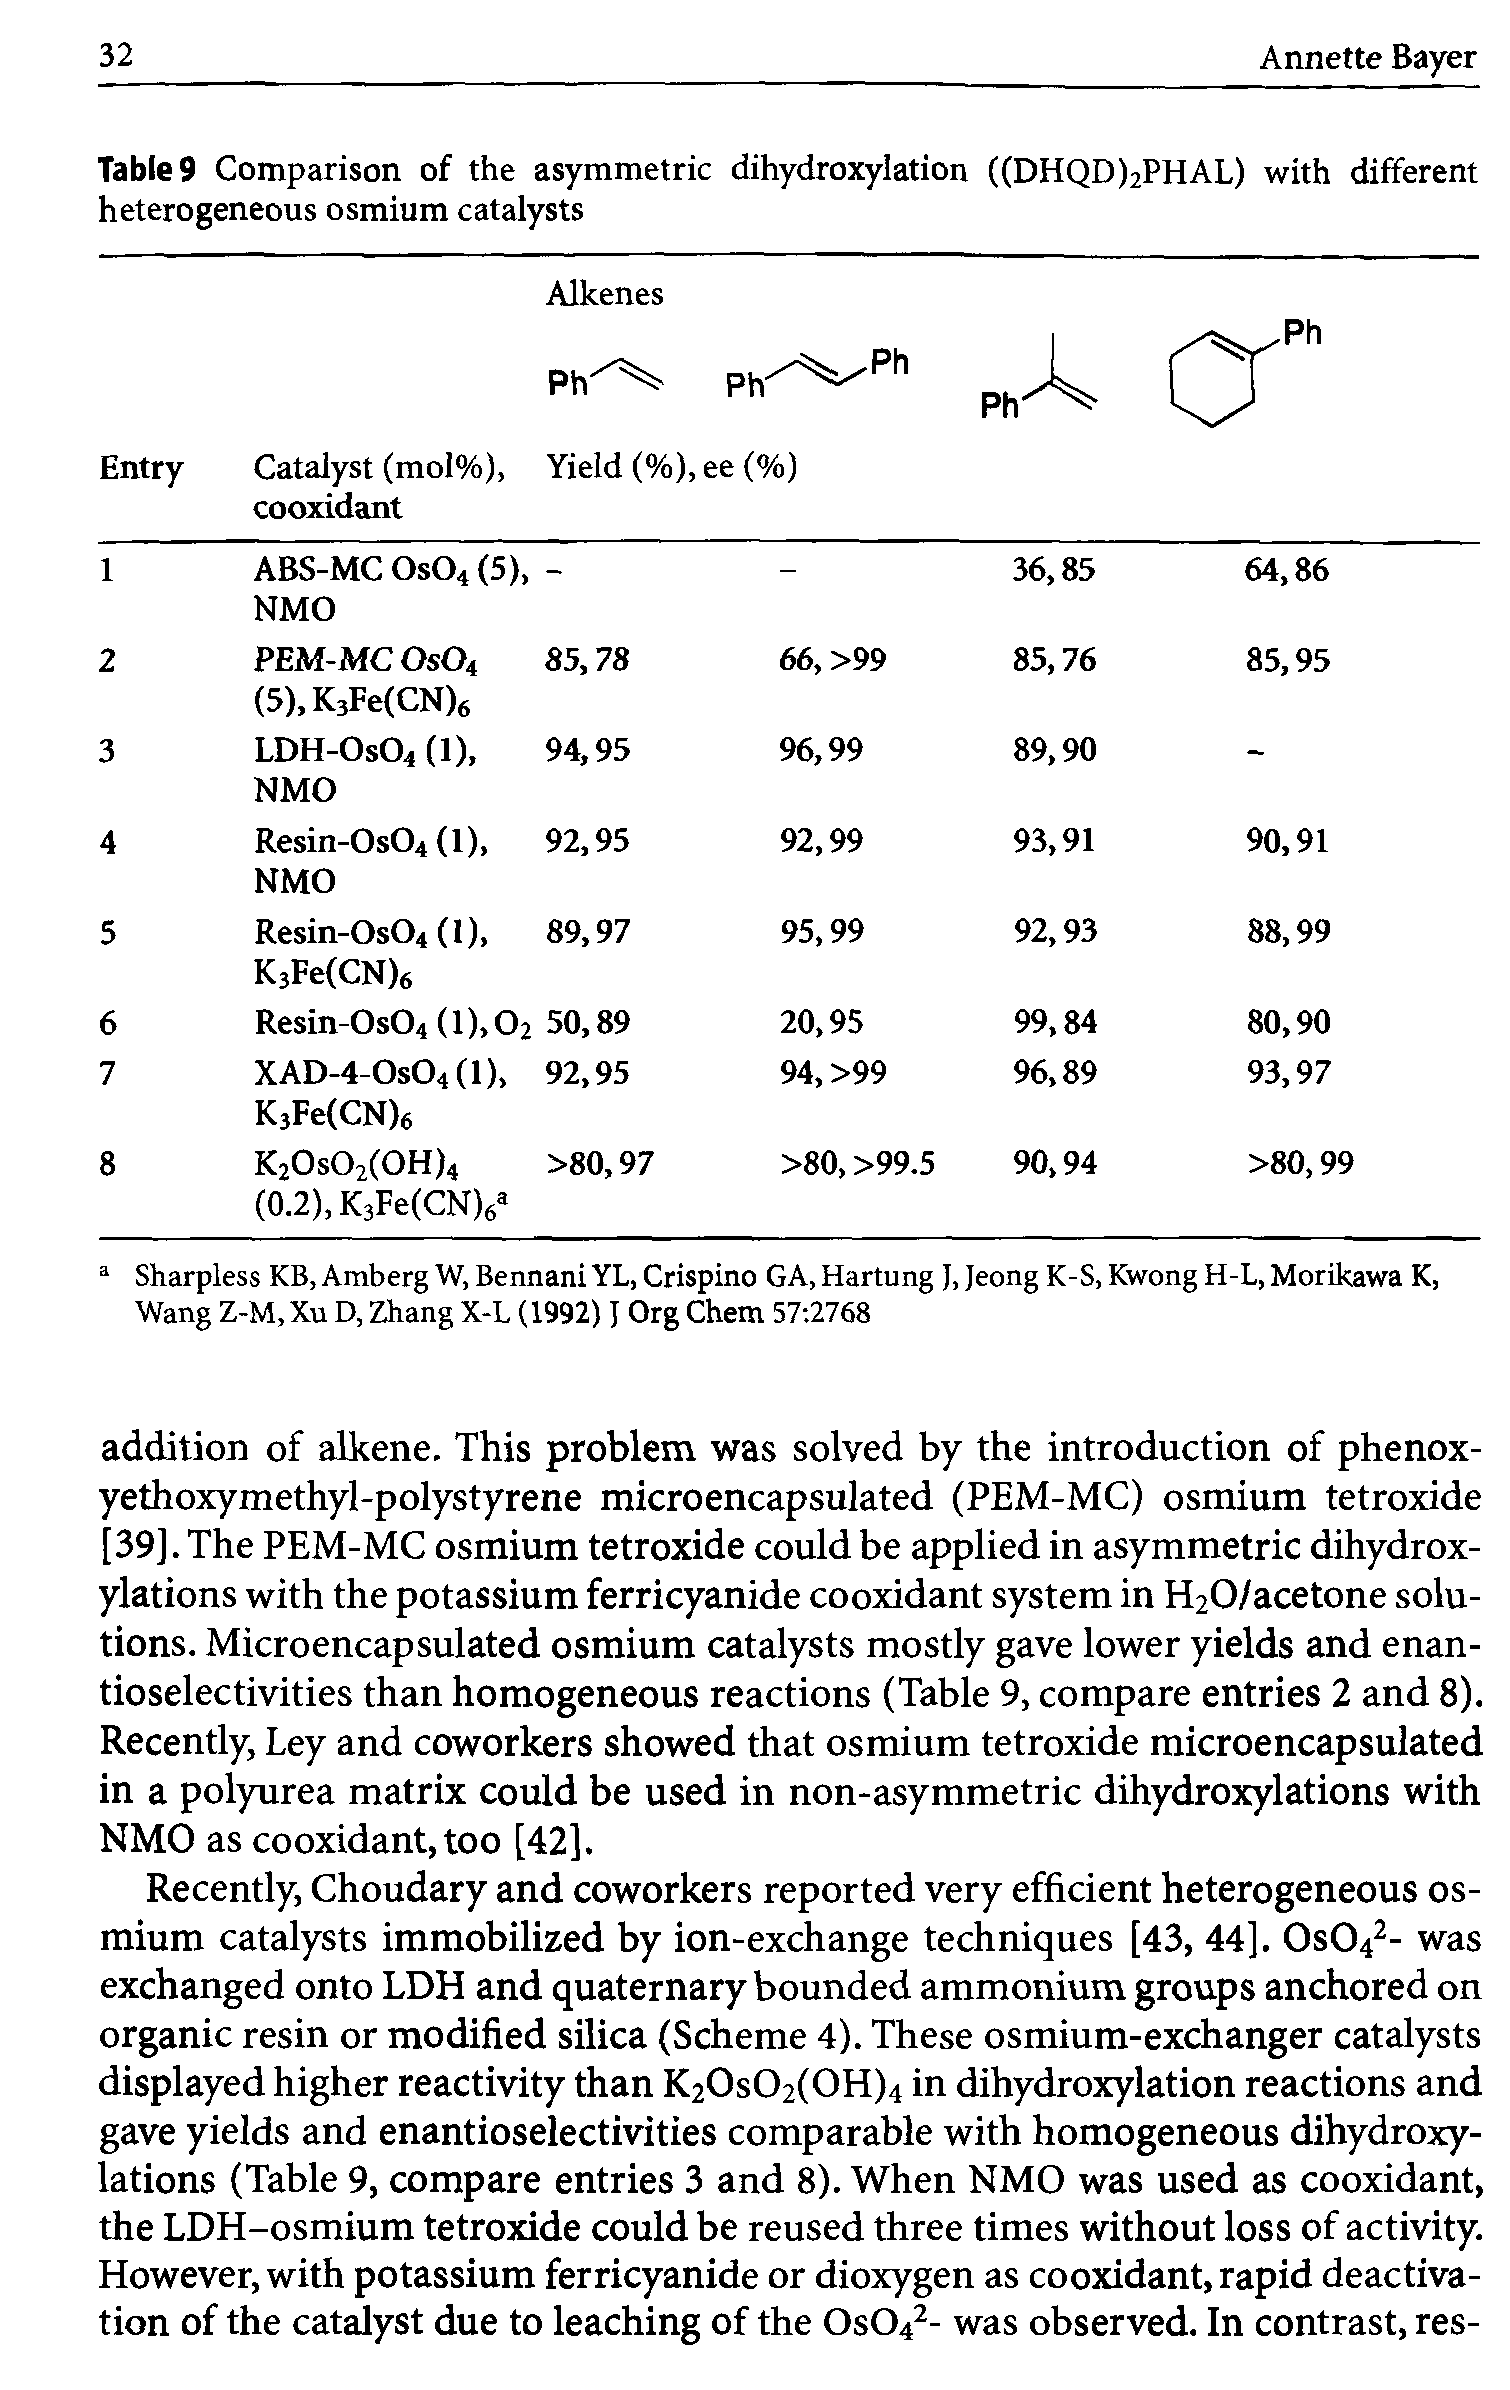 Table 9 Comparison of the asymmetric dihydroxylation ((DHQD)2PHAL) with different heterogeneous osmium catalysts...